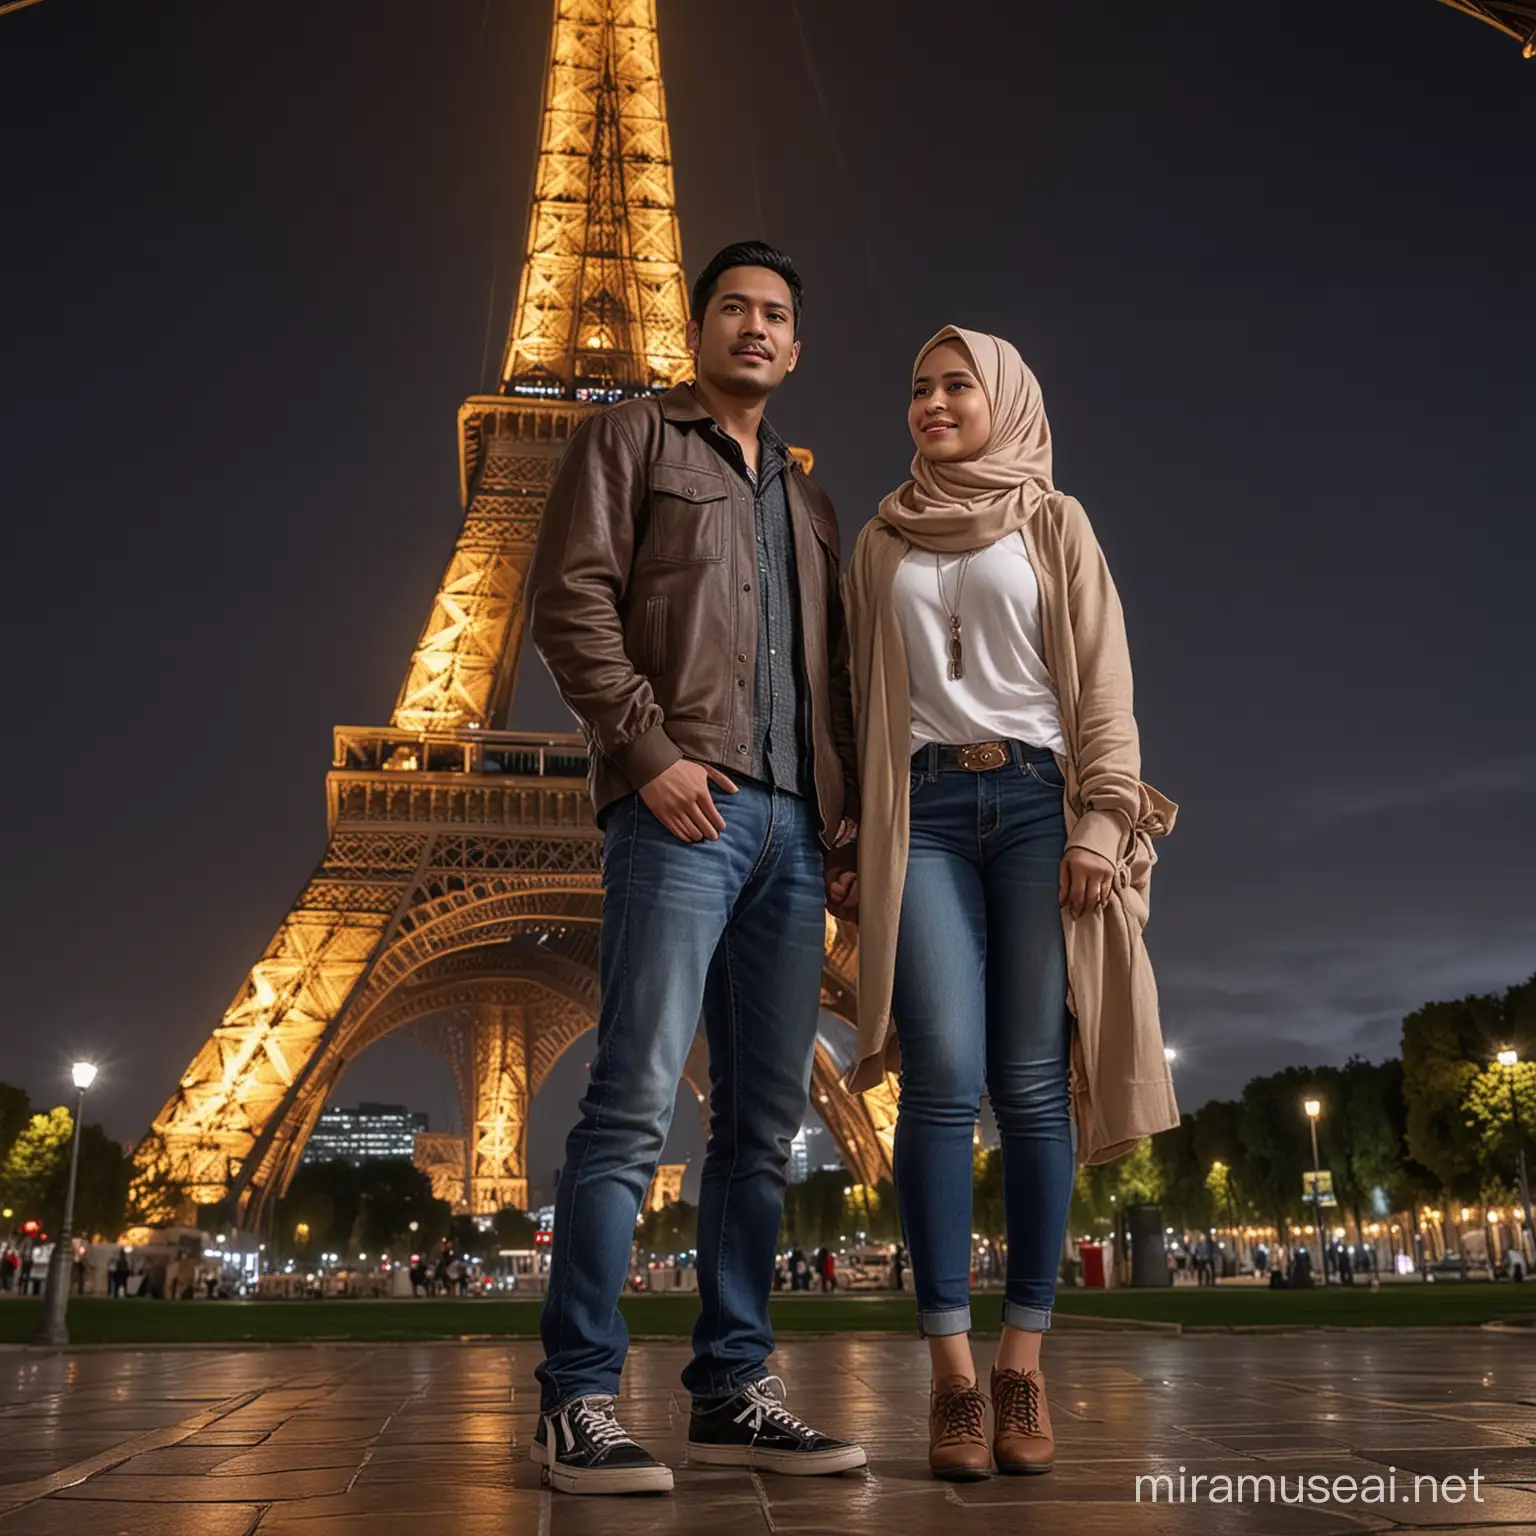 Indonesian Couple in Hijab and Sweater Pose under Eiffel Tower at Night